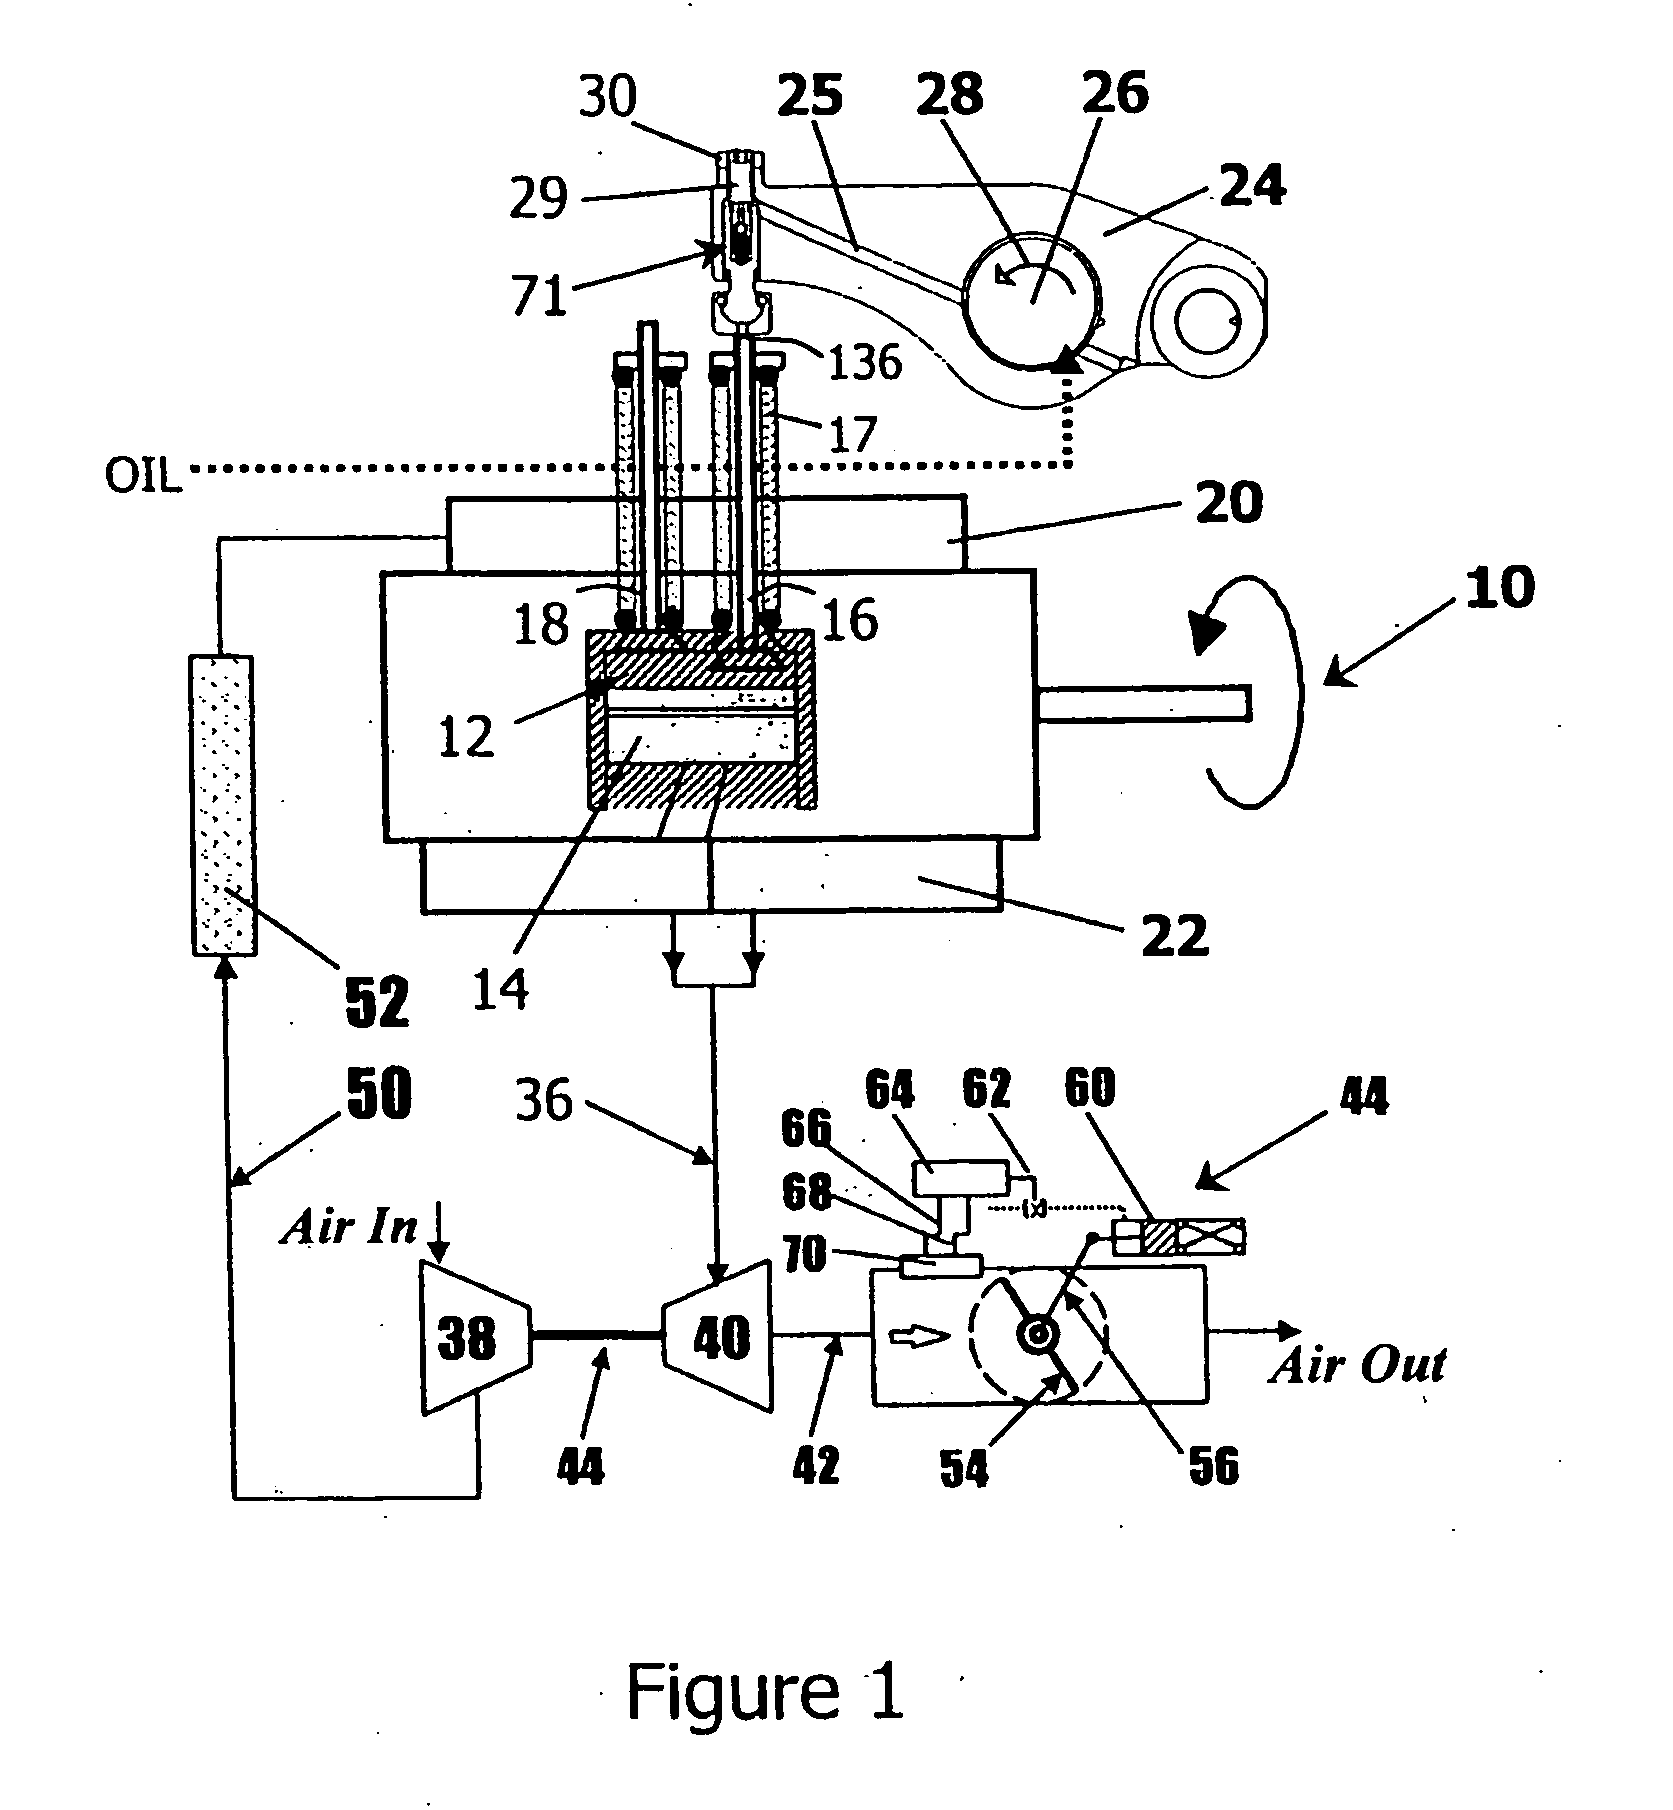 Apparatus and method for retarding an engine with an exhaust brake and a compression release brake